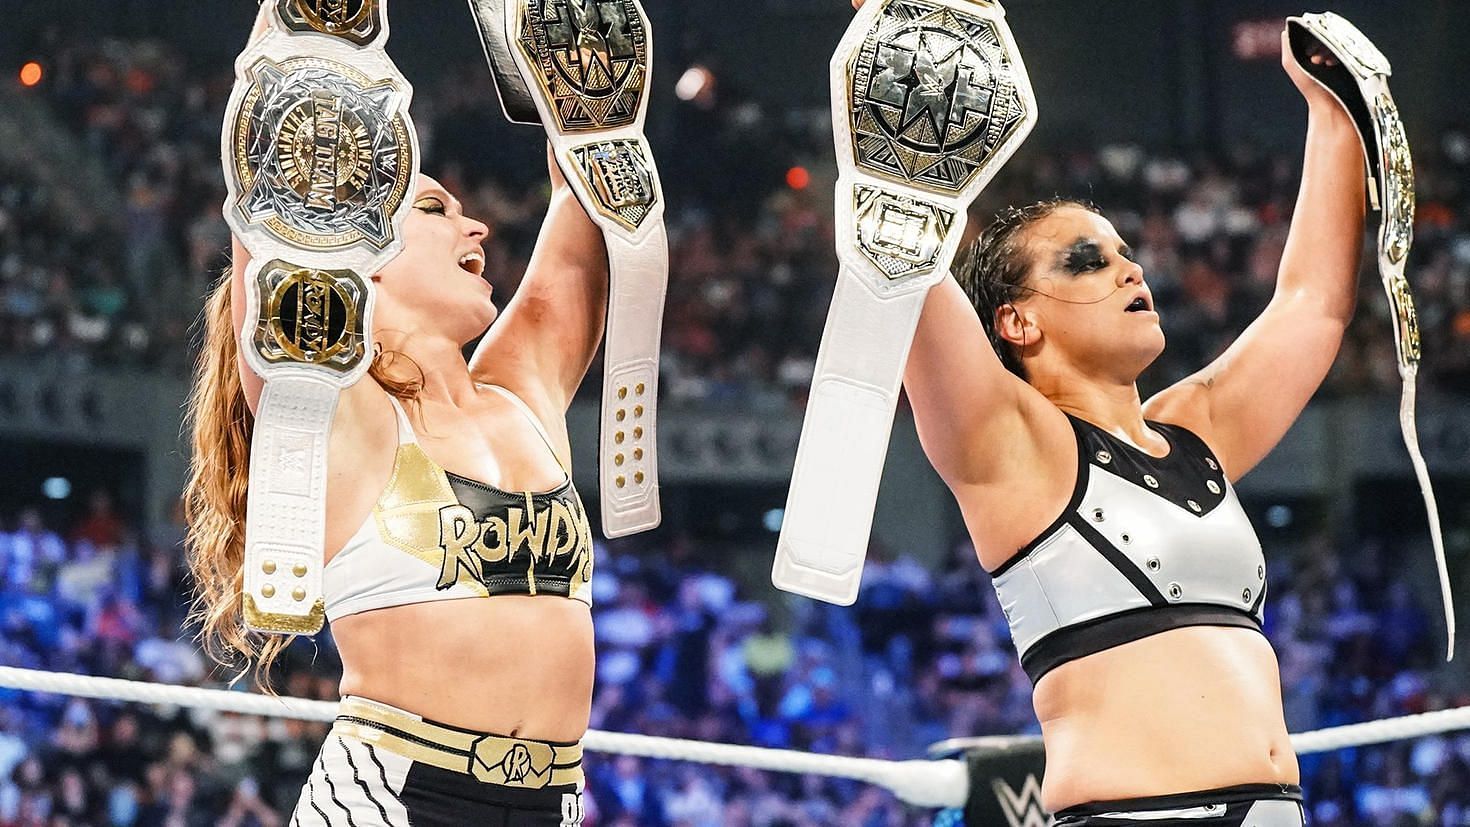 Ronda Rousey and Shayna Baszler were in action on SmackDown